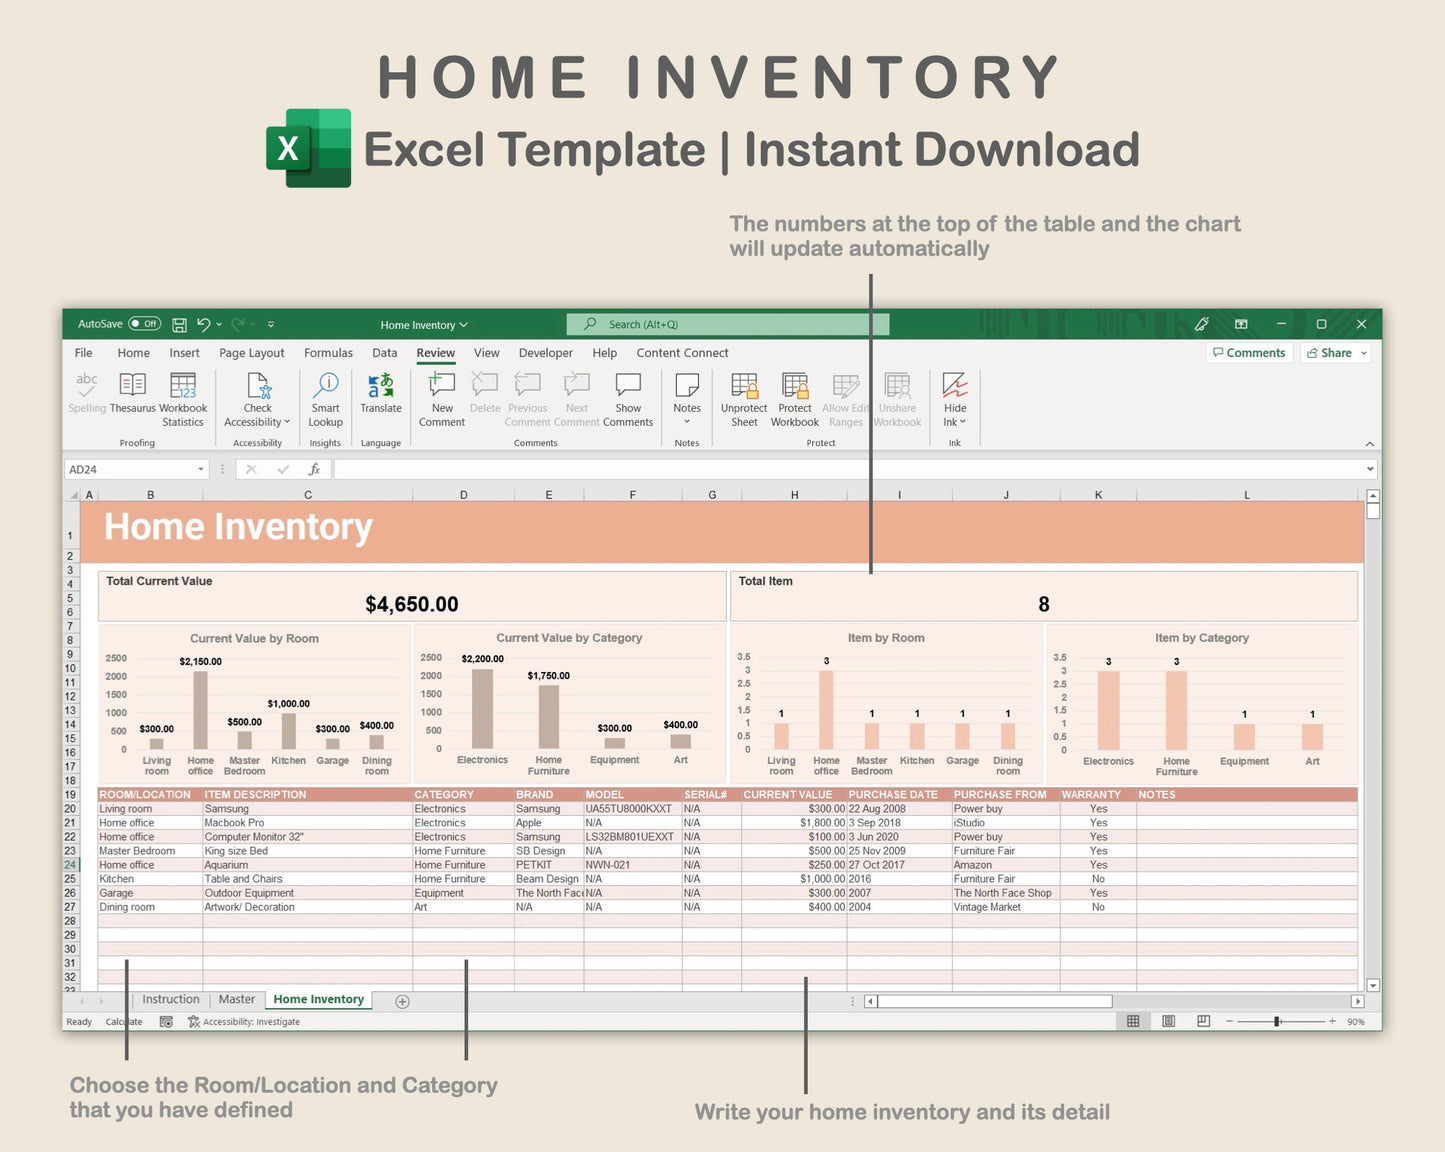 Excel - Home Inventory - Neutral